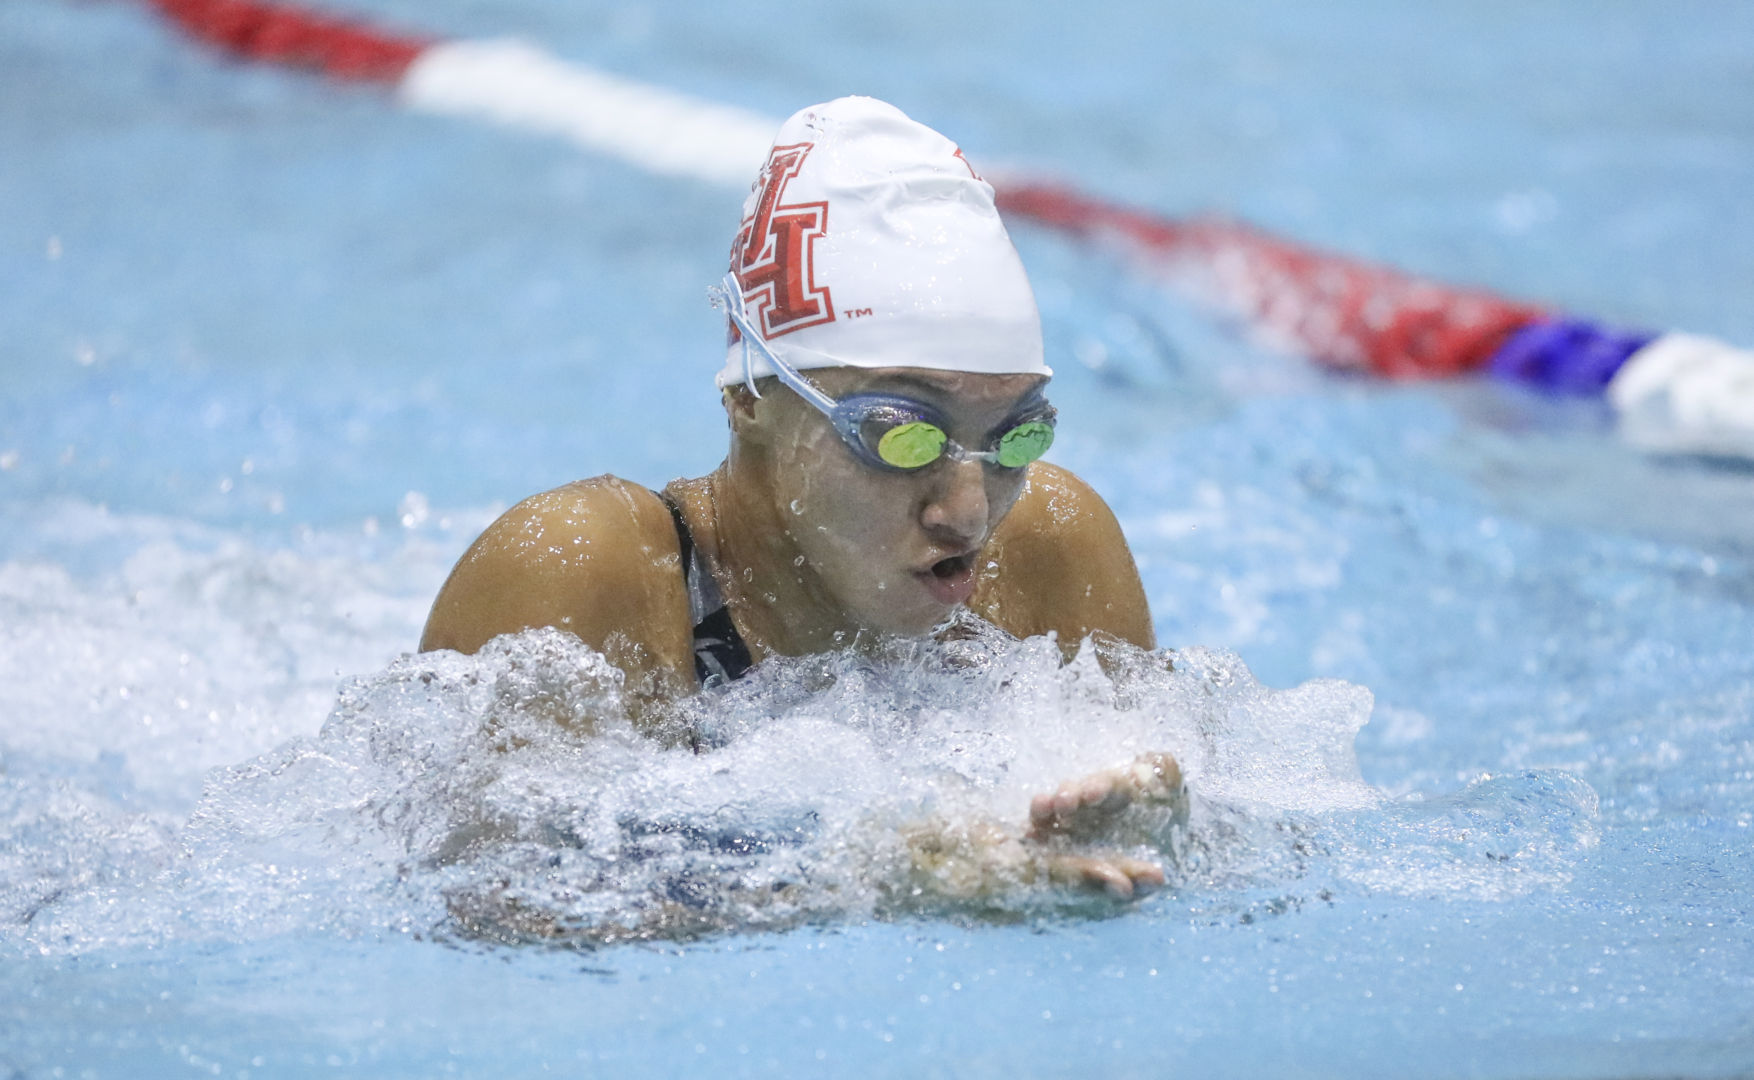 Senior Peyton Kondis posted a 59.16 mark in the 100 breaststroke at the Phill Hansel Invitation over the weekend, the fourth-fastest time in the NCAA this season. | Courtesy of UH athletics